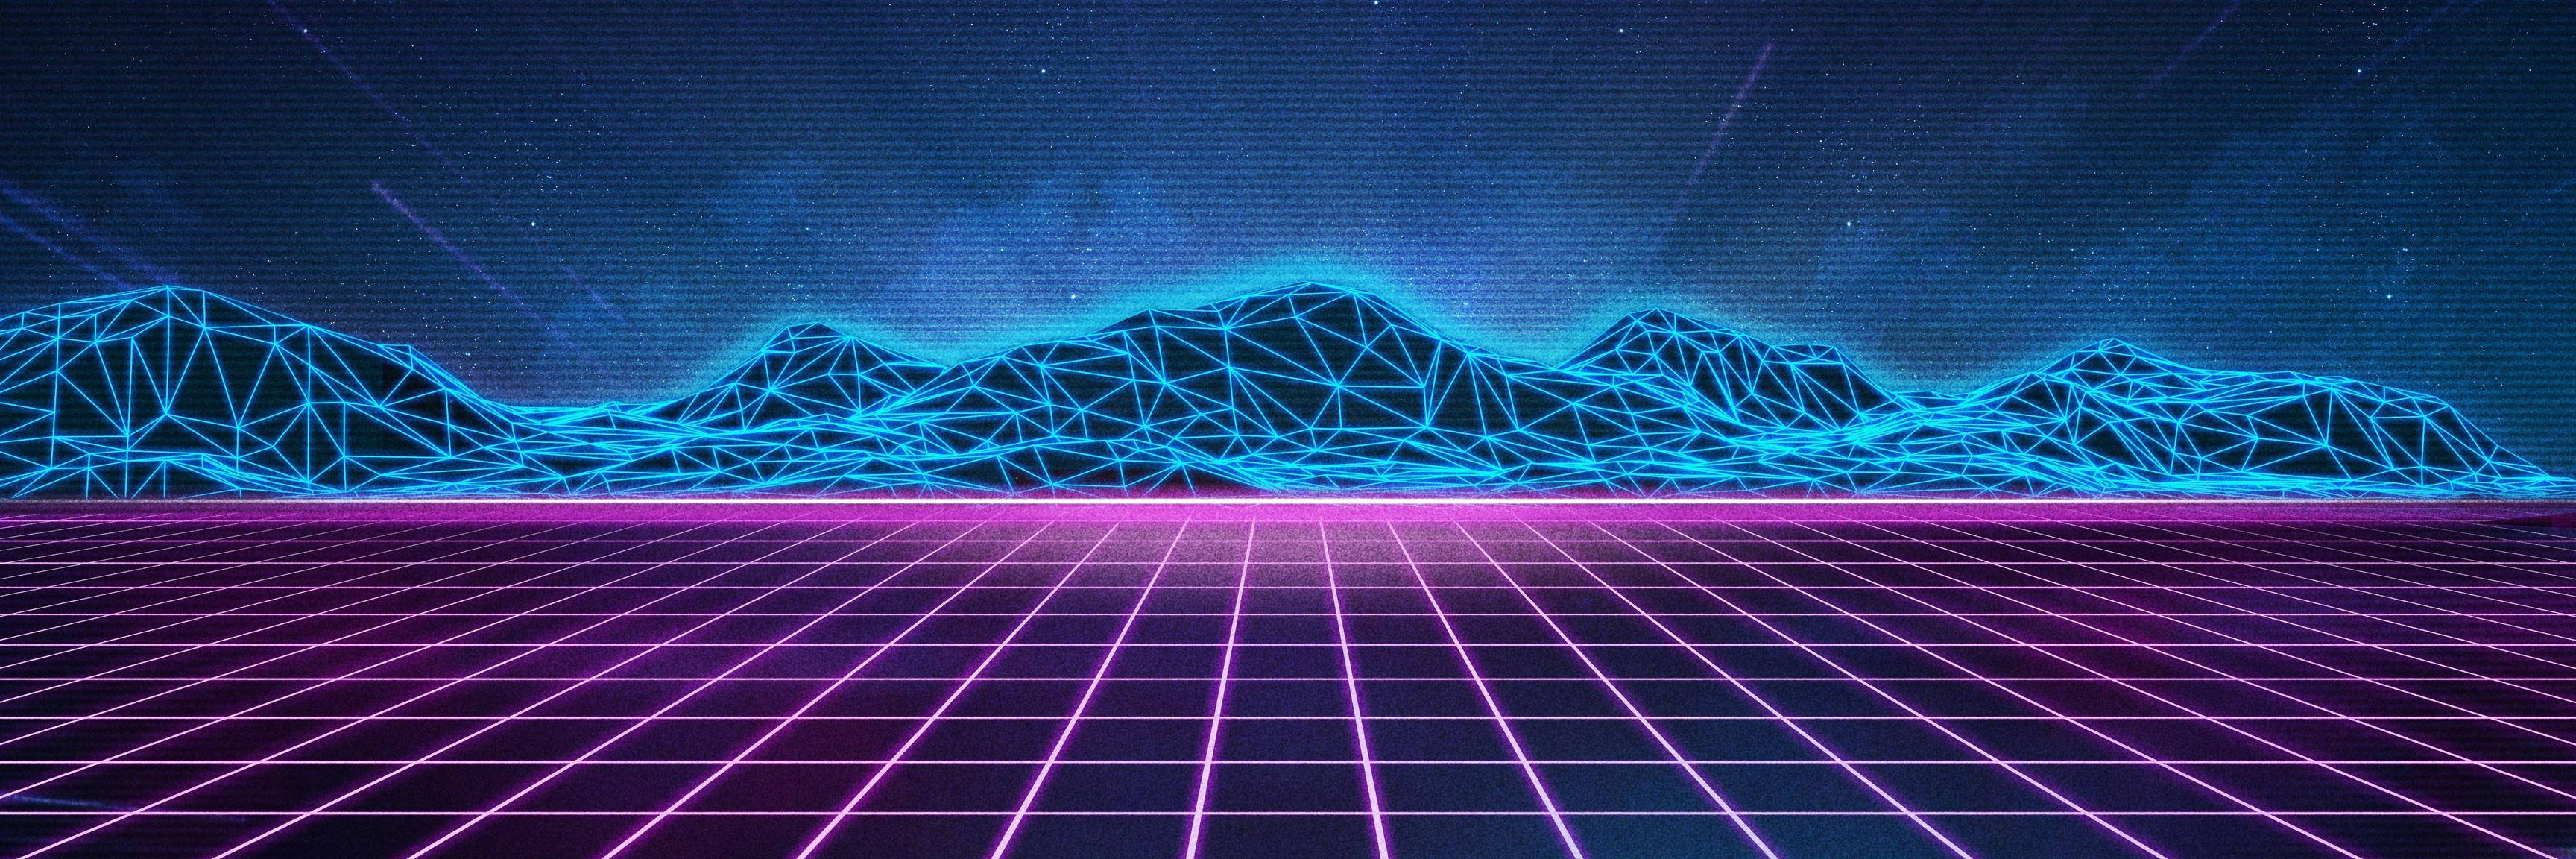 80S 3456X1152 Wallpaper and Background Image